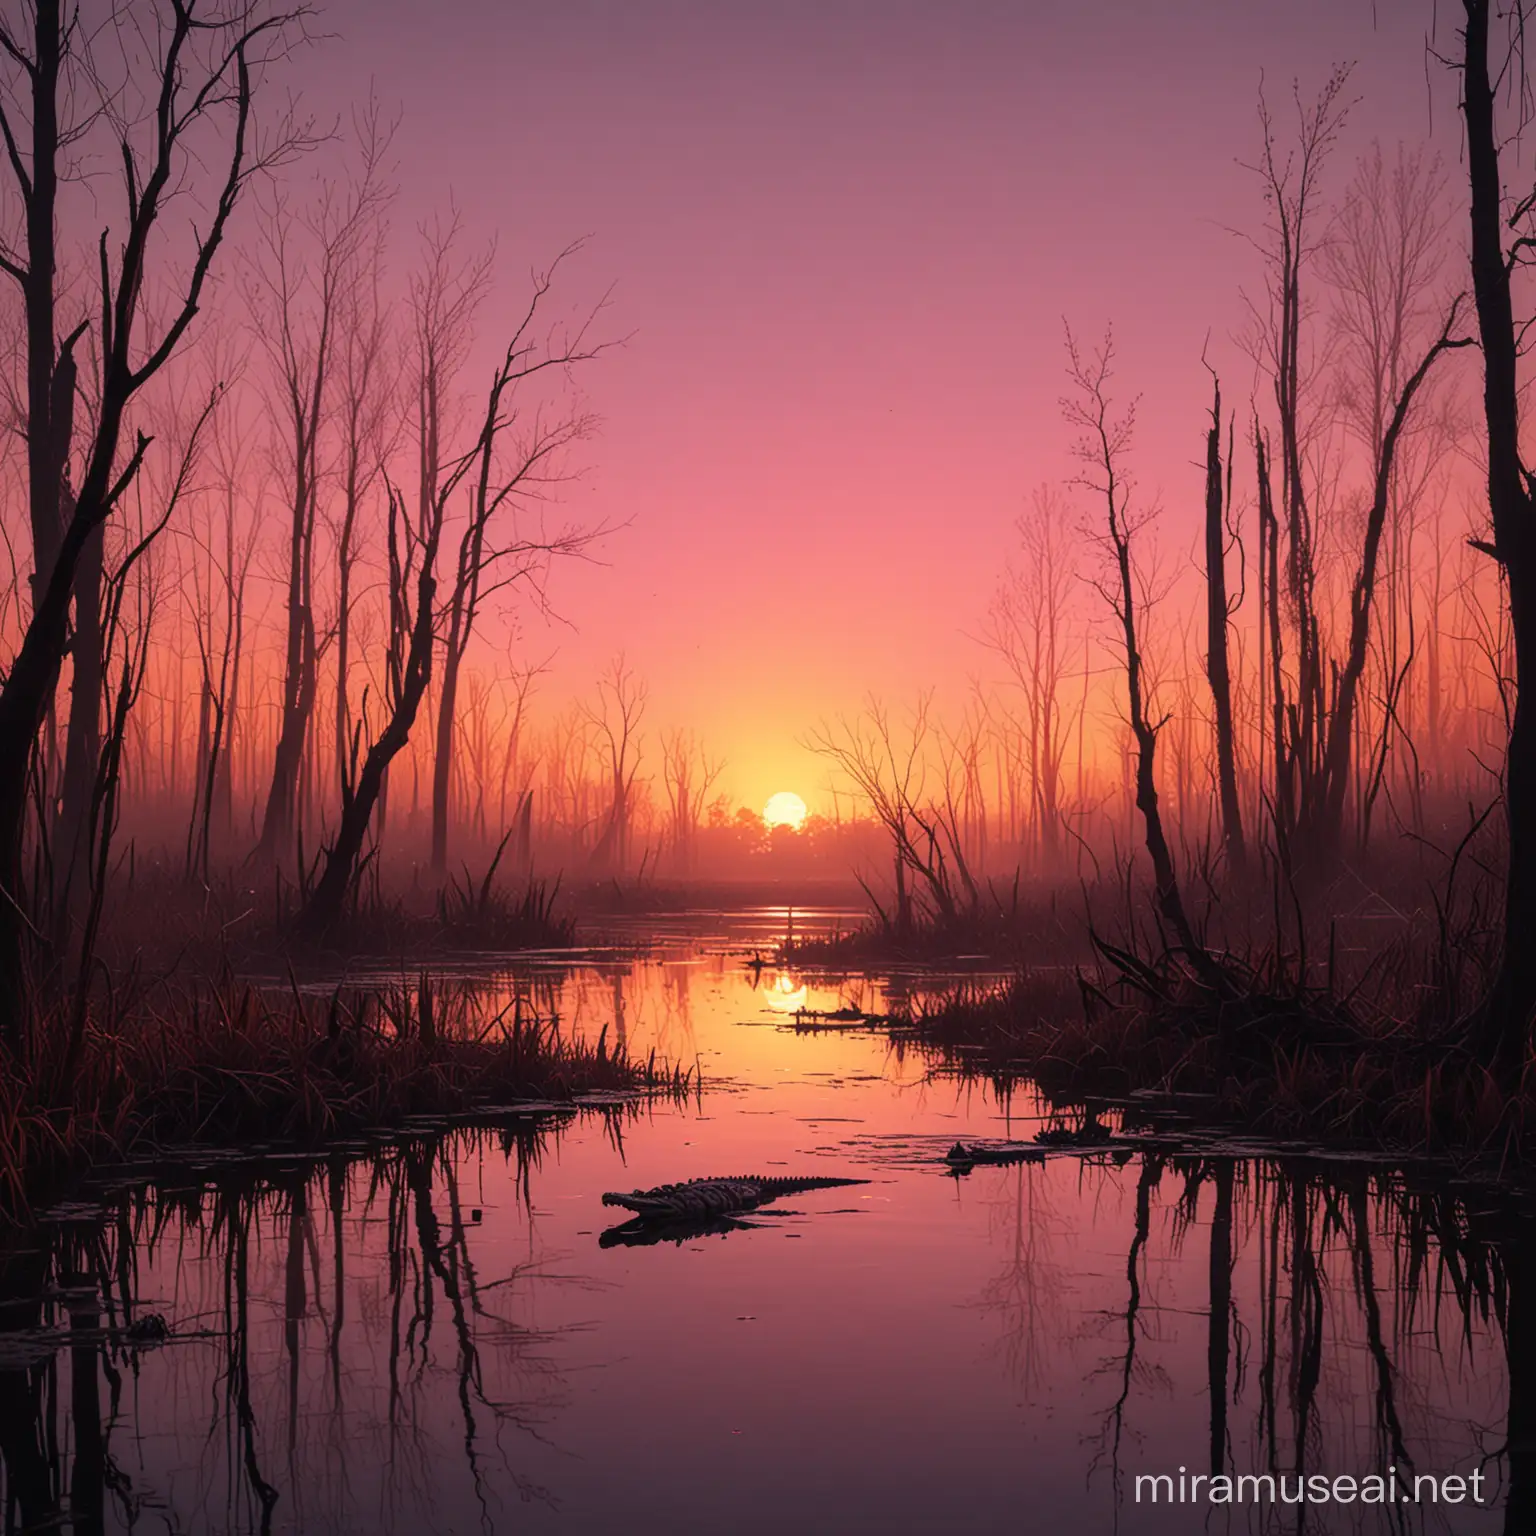 a creepy swamp backlit by a setting sun with pink and orange hues, with a crocodile hidden in the water.
pixelated
